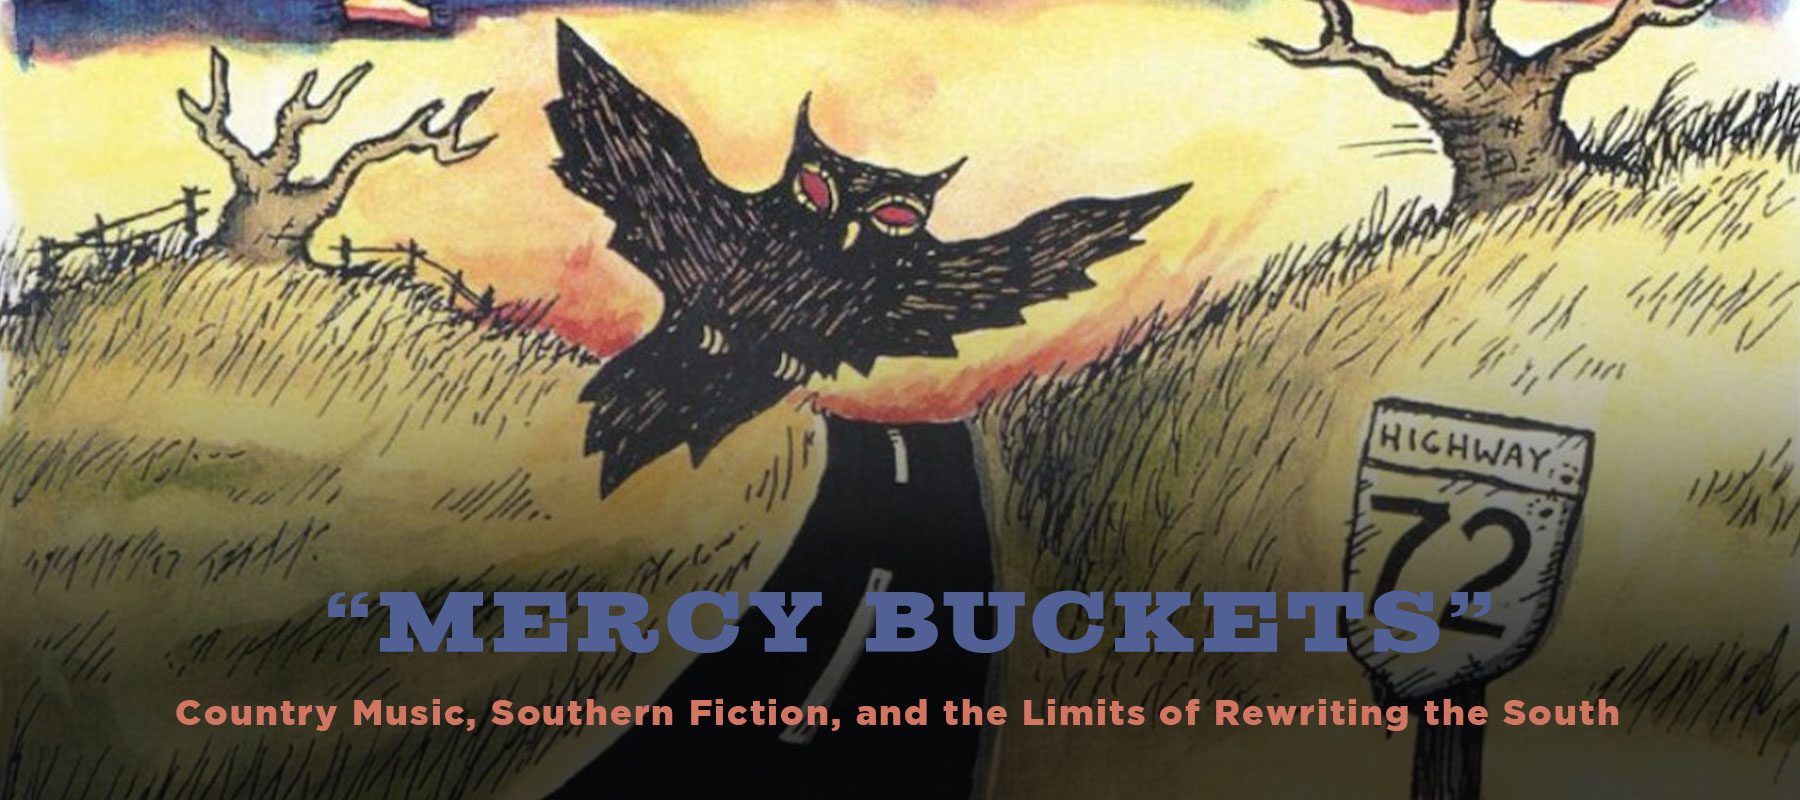 “Mercy Buckets”: Country Music, Southern Fiction, and the Limits of Rewriting the South